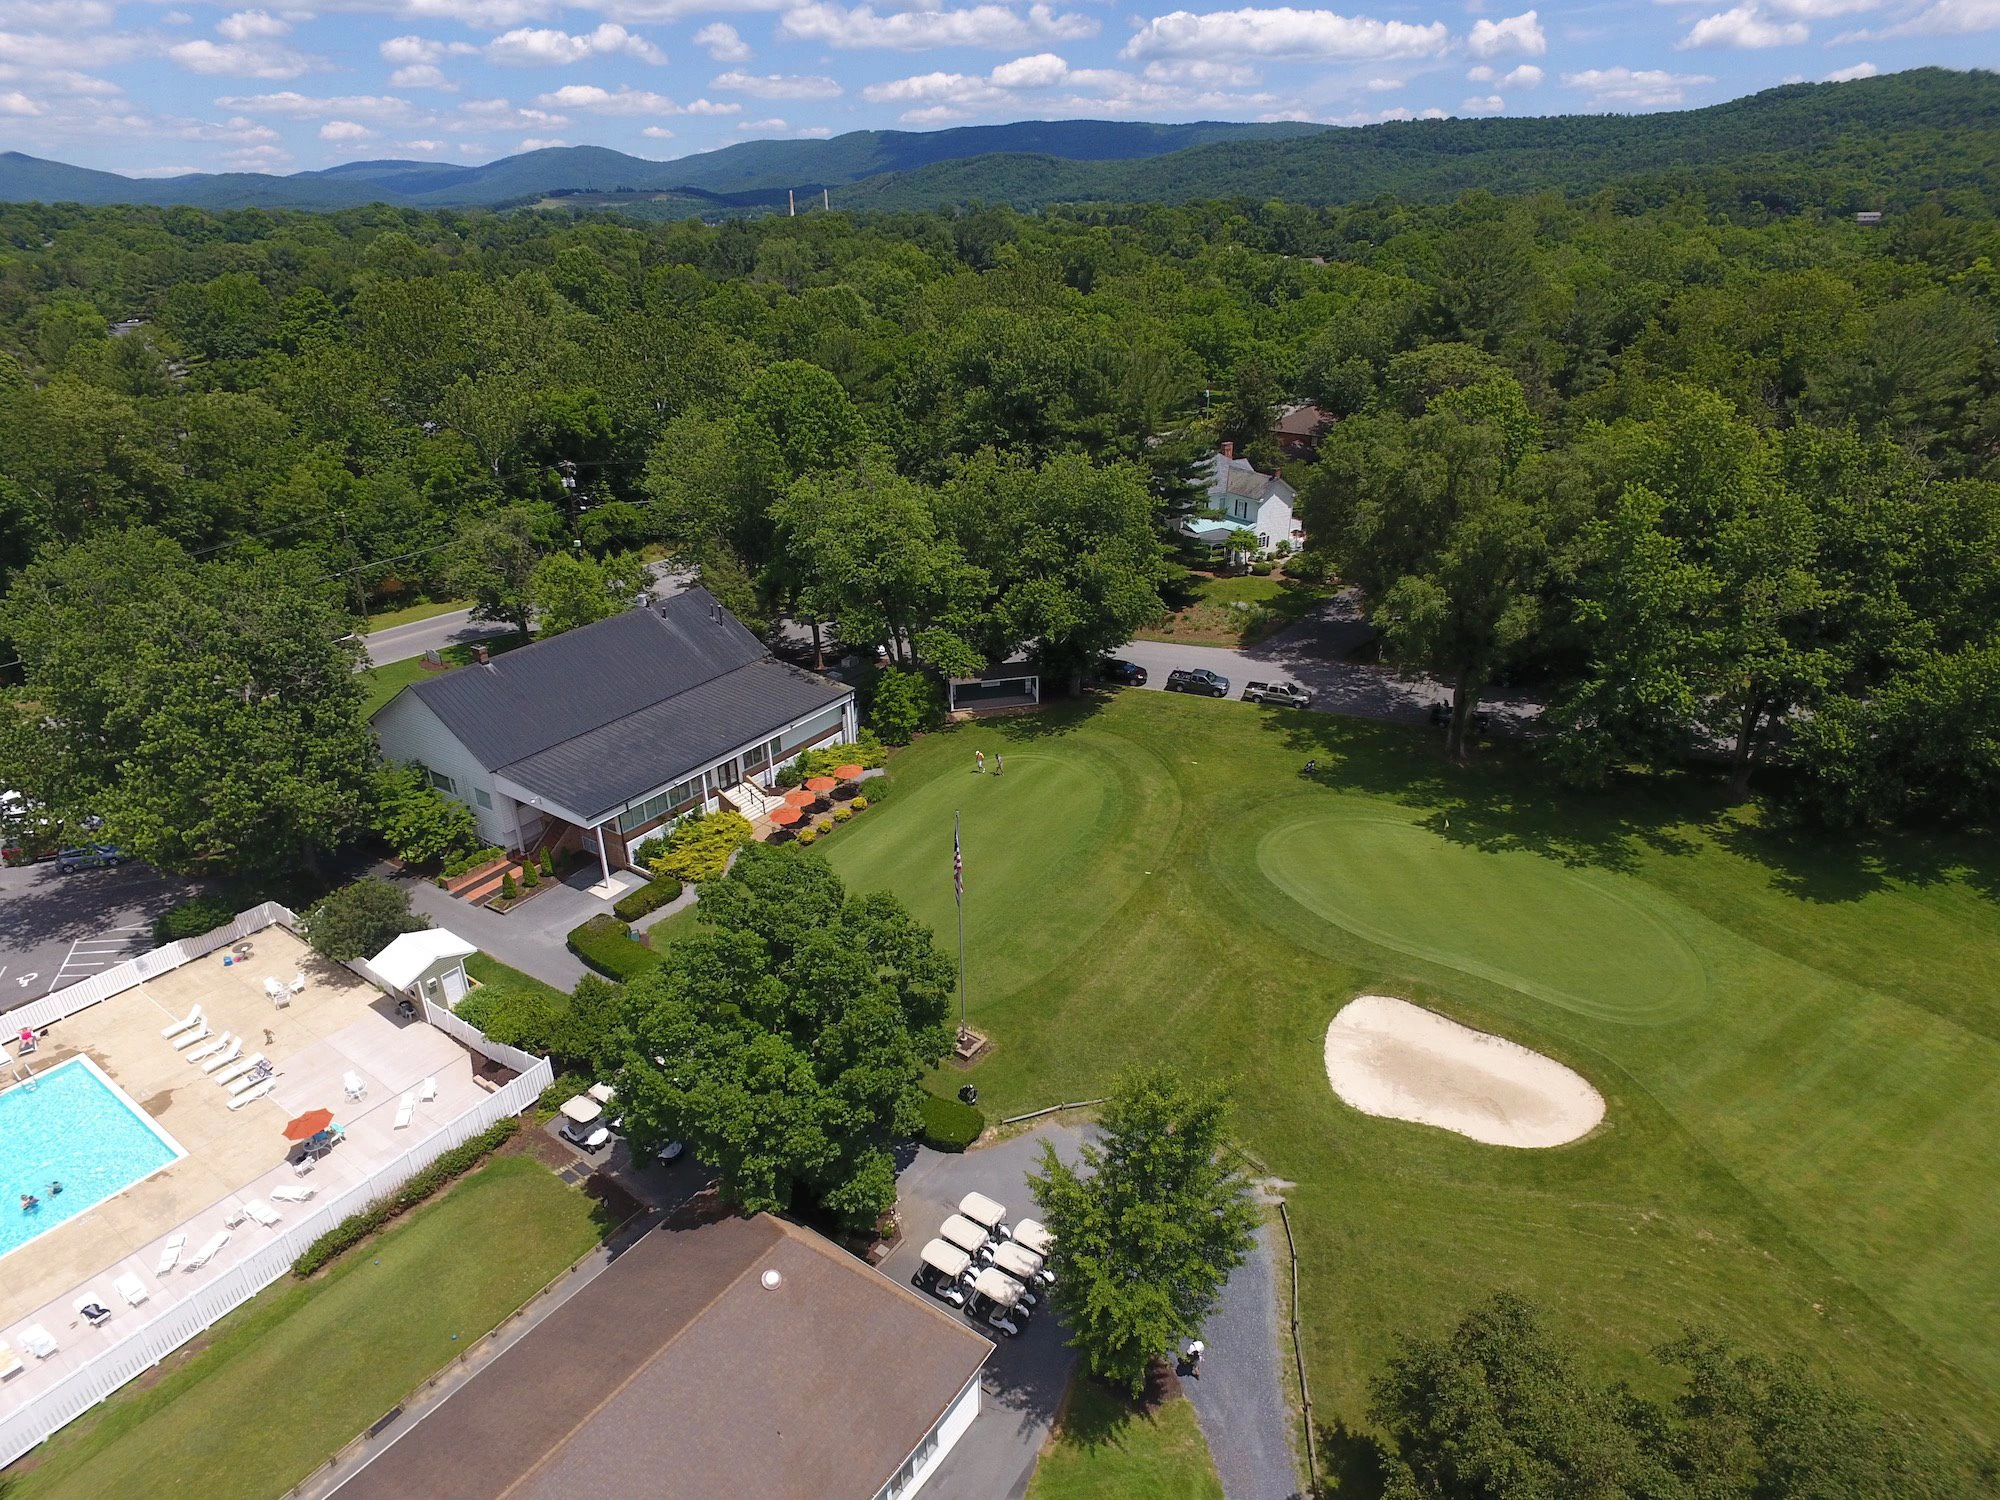 Waynesboro Golf & Country Club - See & Do - Attractions